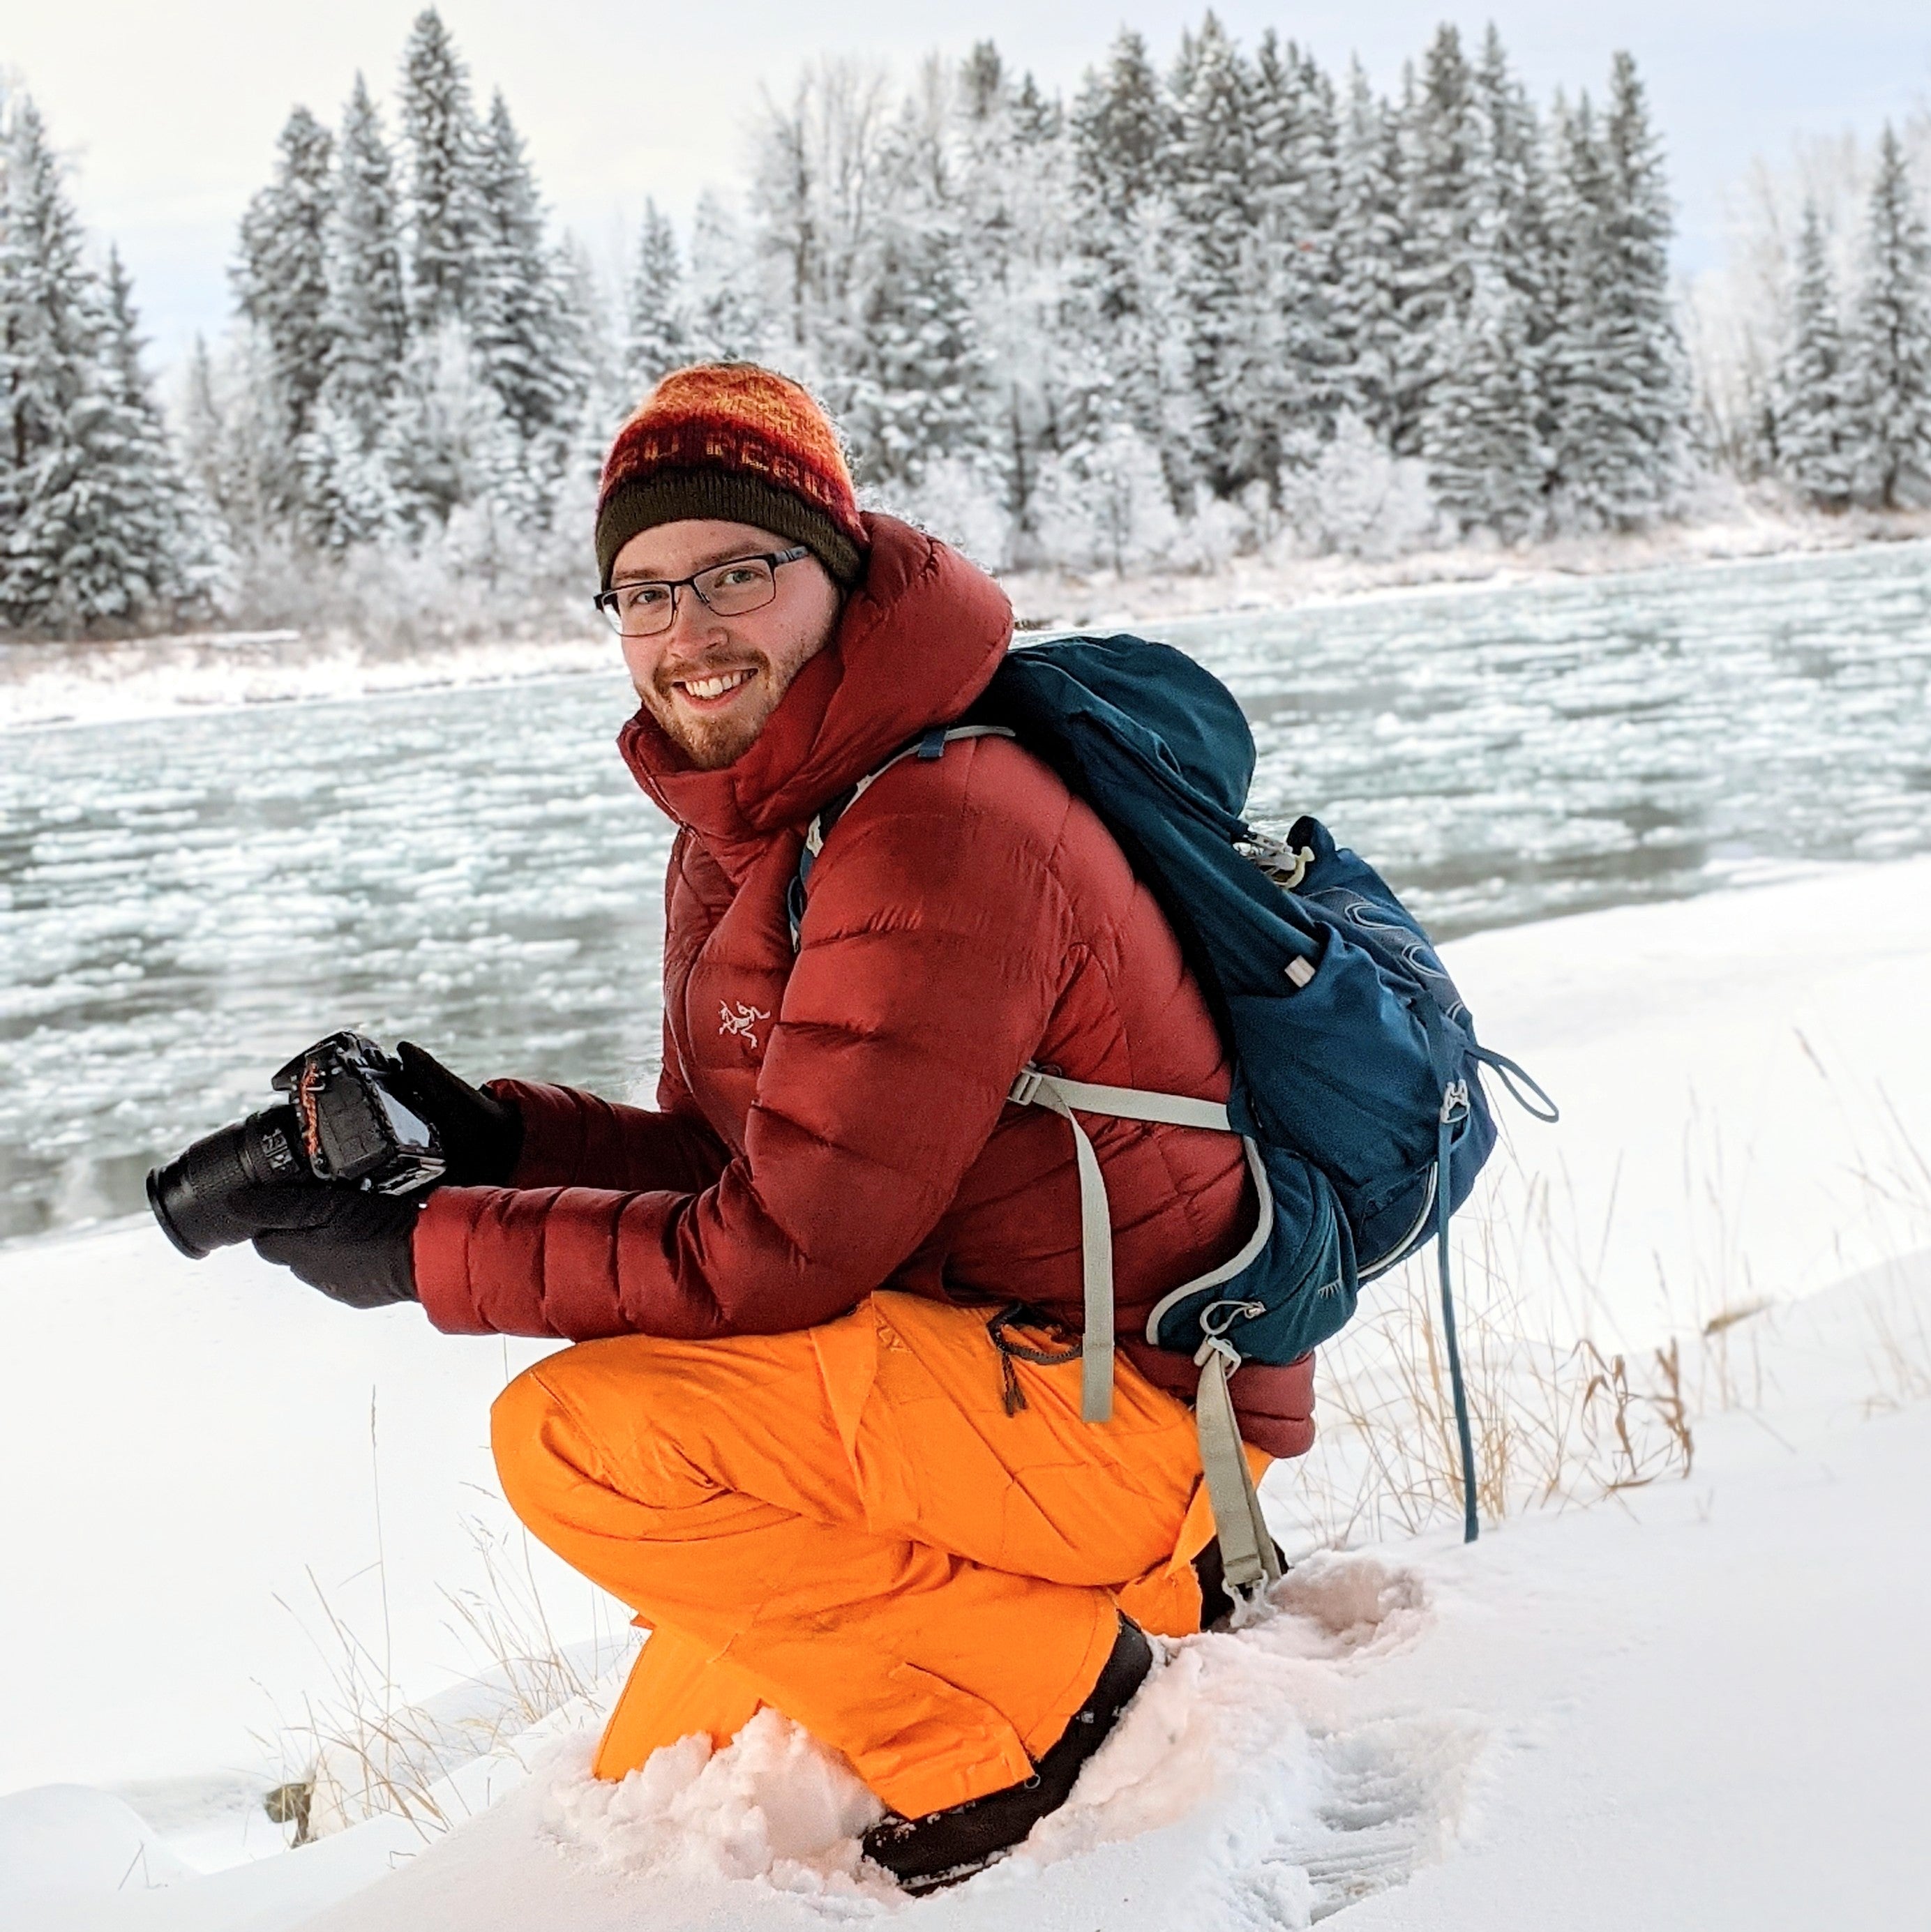 Geoffrey Coulthard Photographer About Me. Portrait or Profile picture of Geoffrey coulthard. Photographer for GeoffreyPrints. Kneeling in snow with orange snowpants and red jacket holding a camera. Kneeling in front of a flowing river covered with ice chunks and snowy trees in background. 